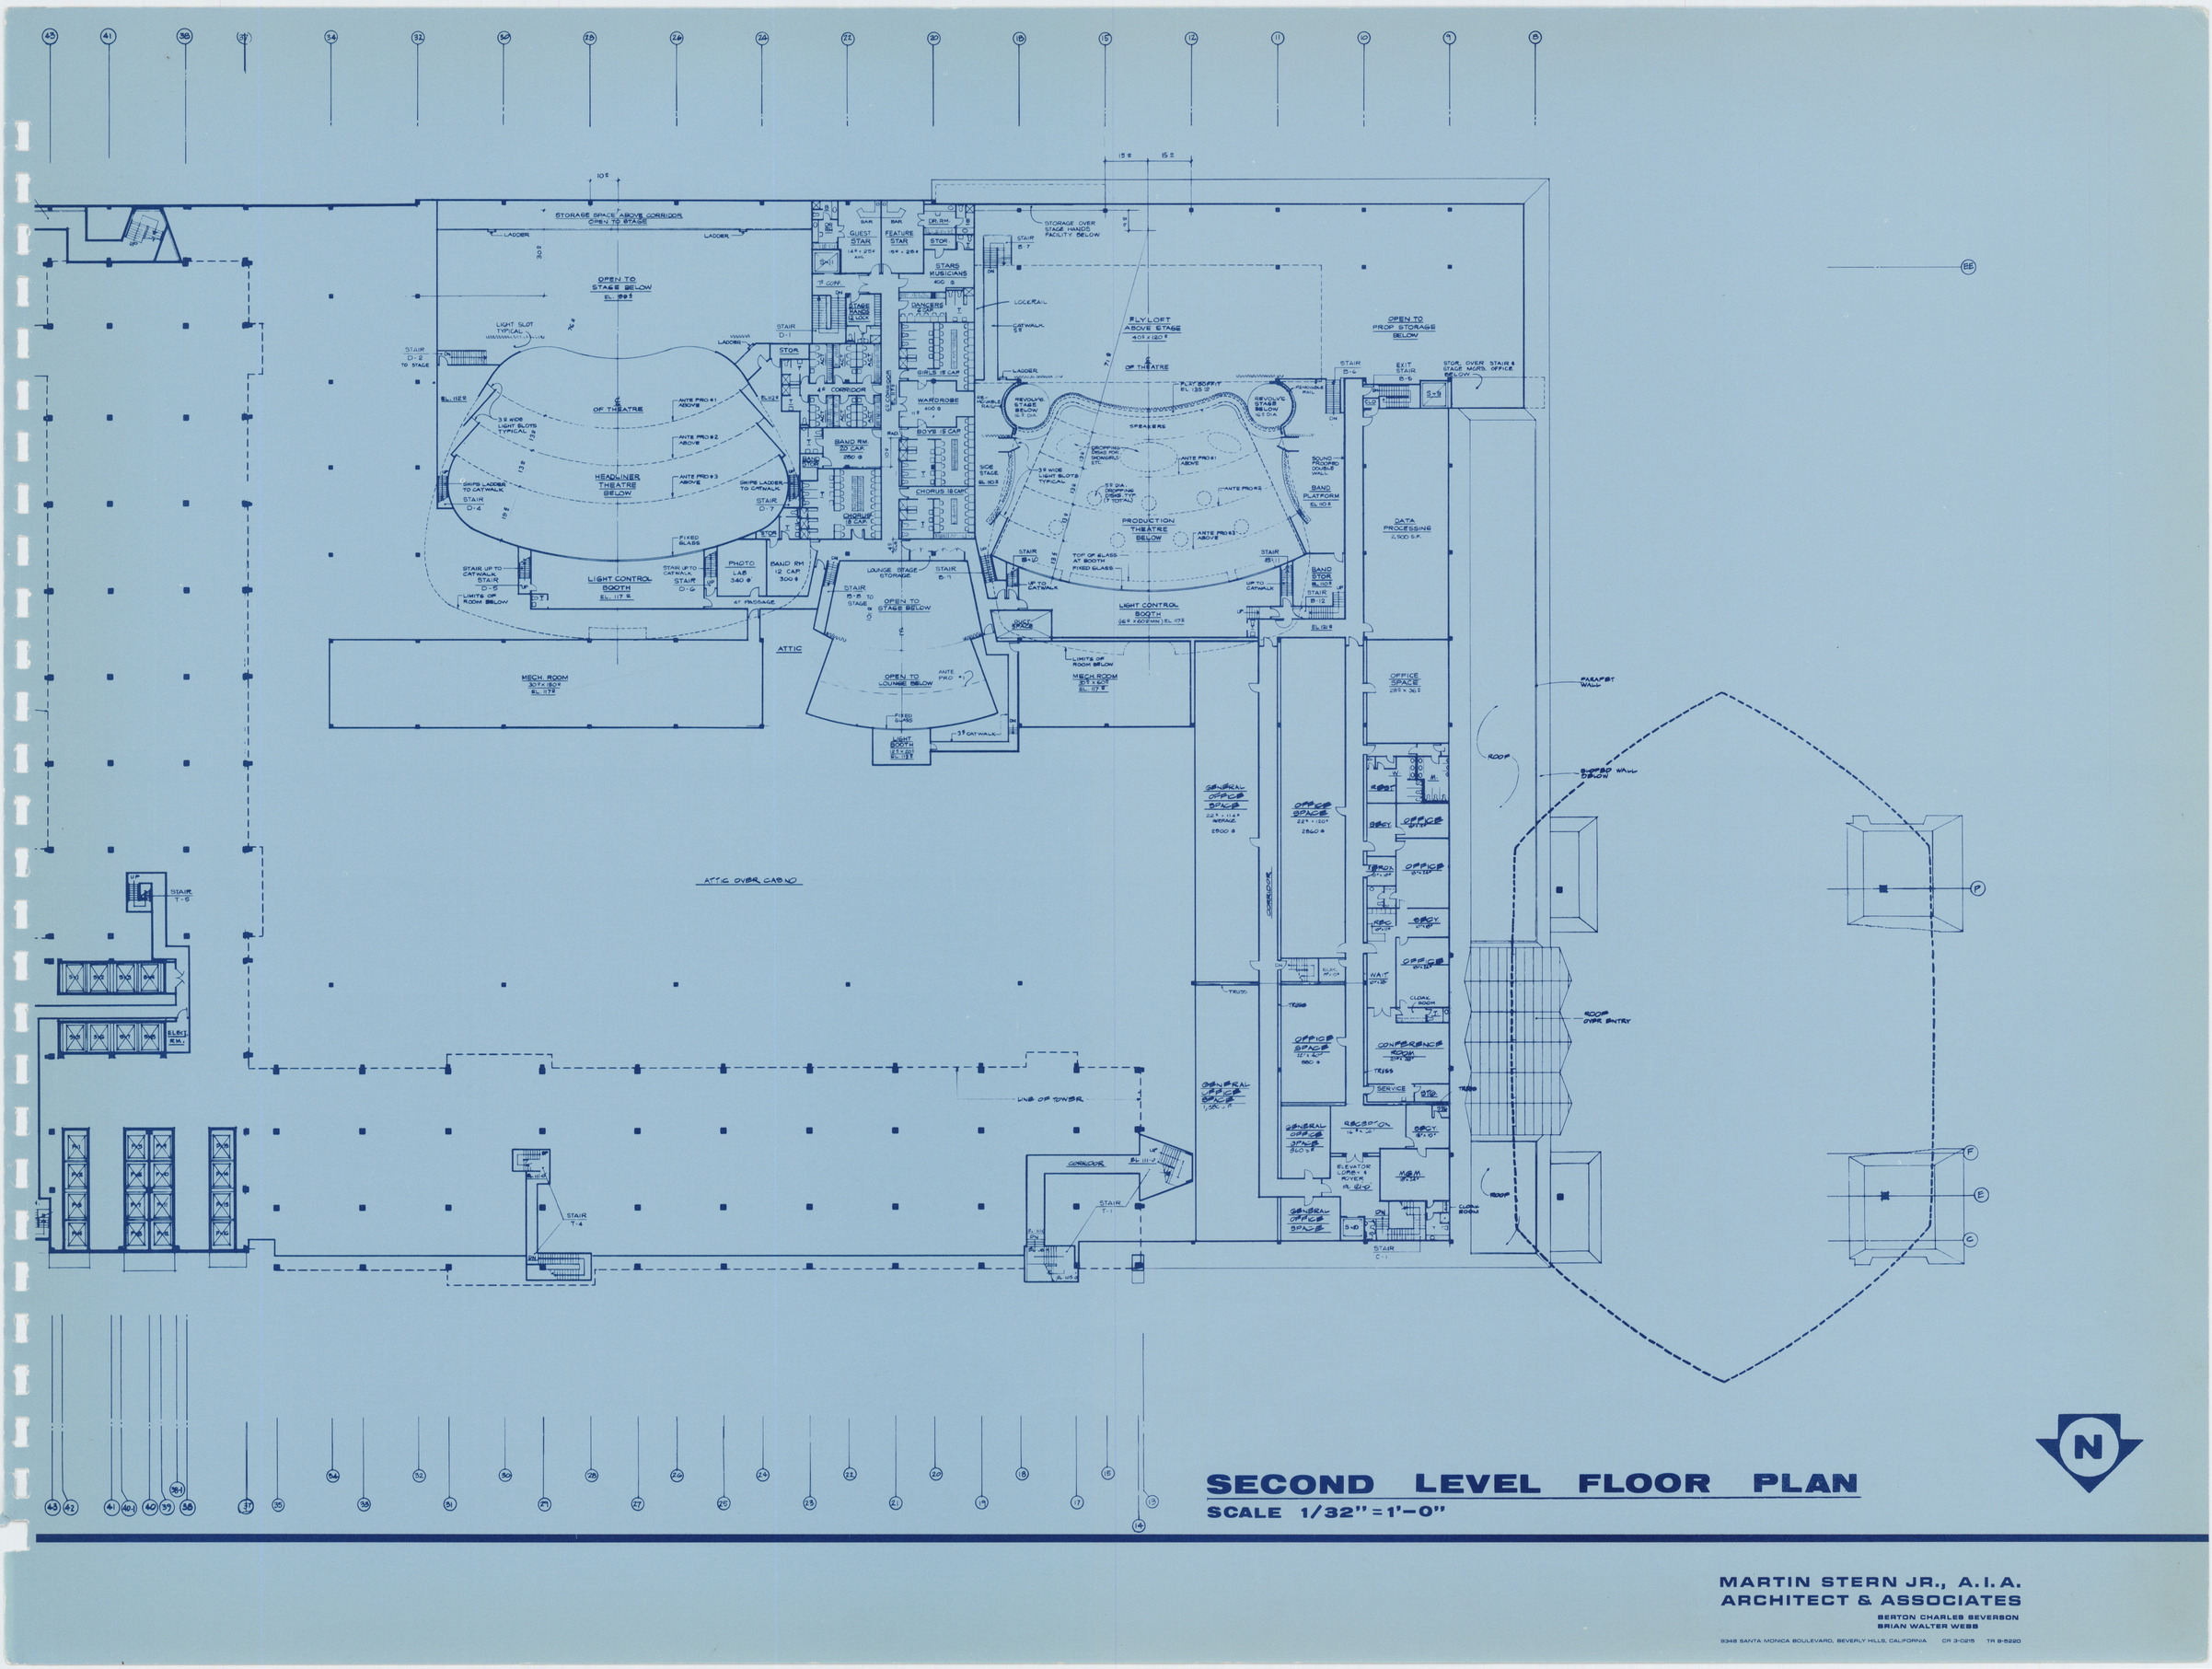 Proposal for the MGM Grand Hotel (Las Vegas), circa 1972, image 10